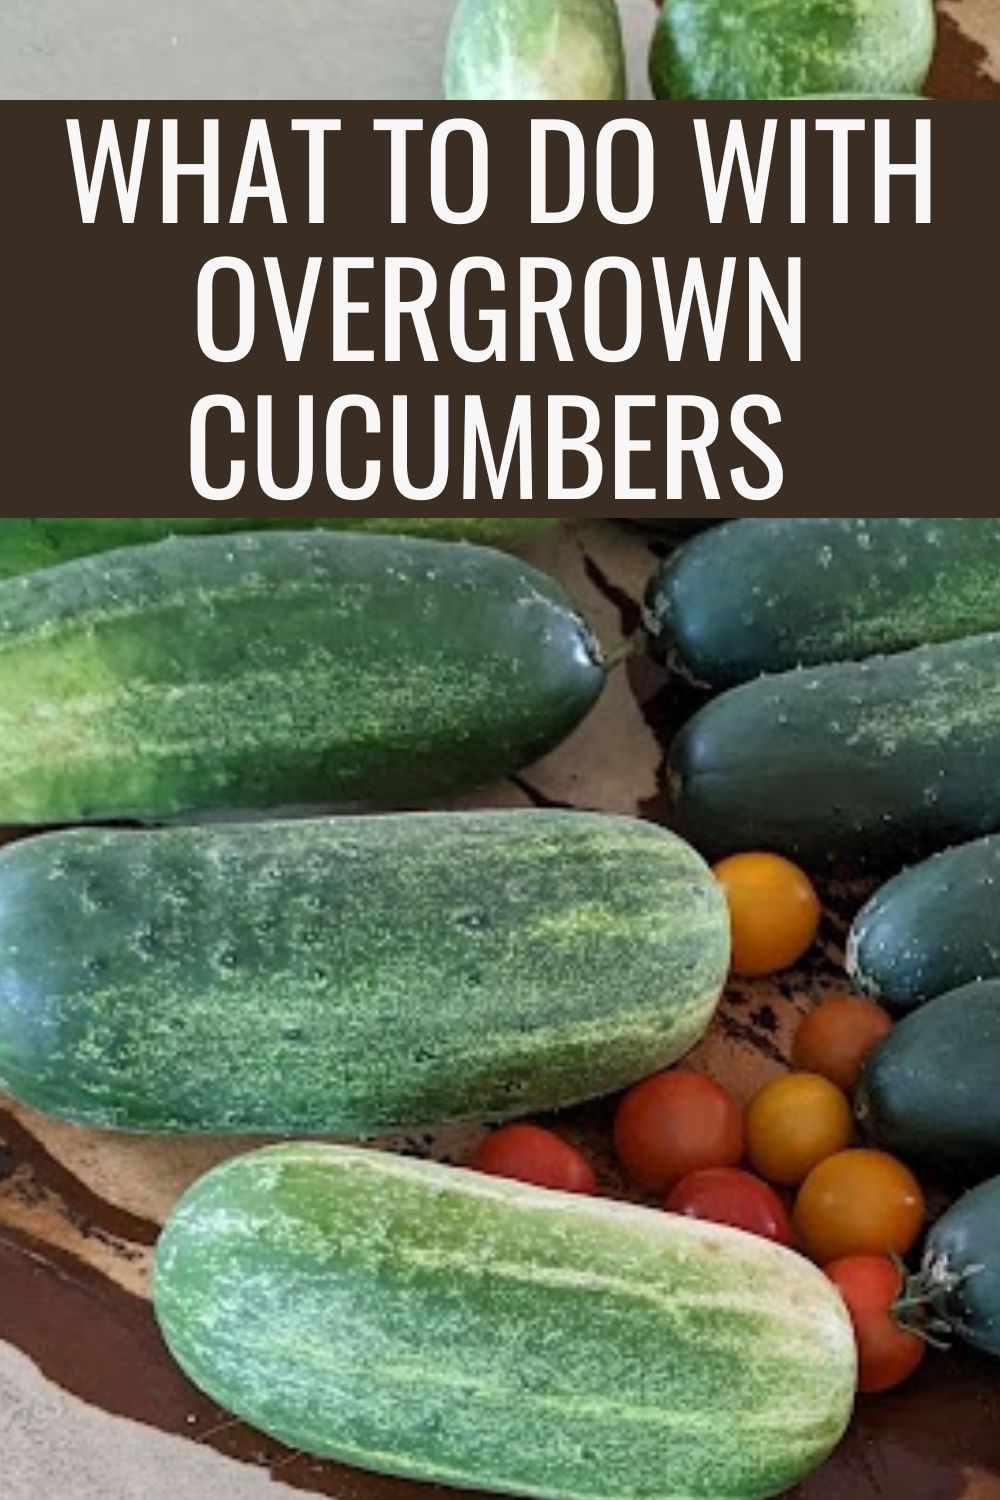 What to do with overgrown cucumbers